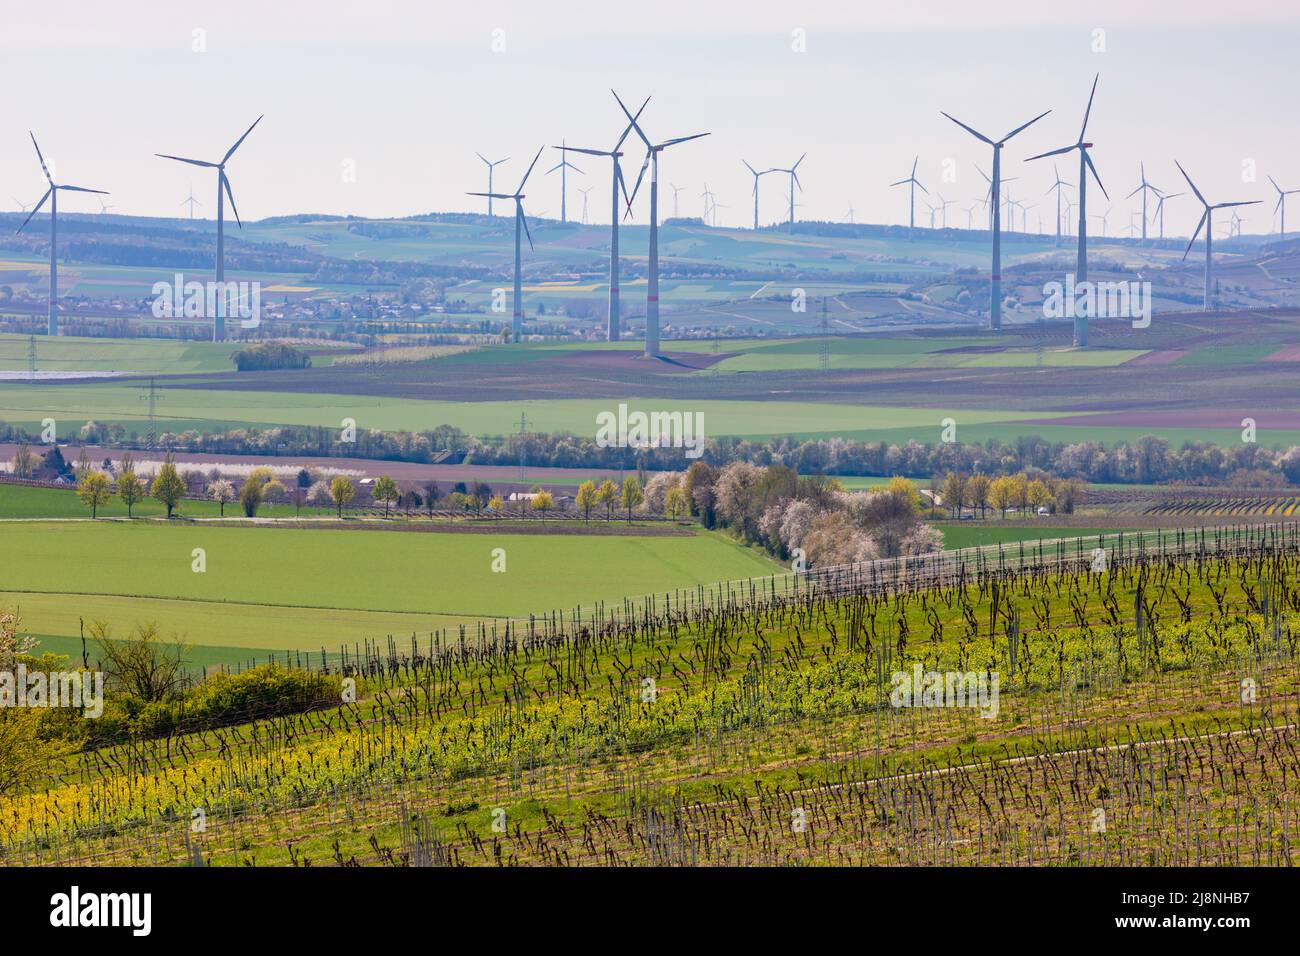 An endless number of wind turbines spoil the landscape in rural Rhineland, Germany Stock Photo